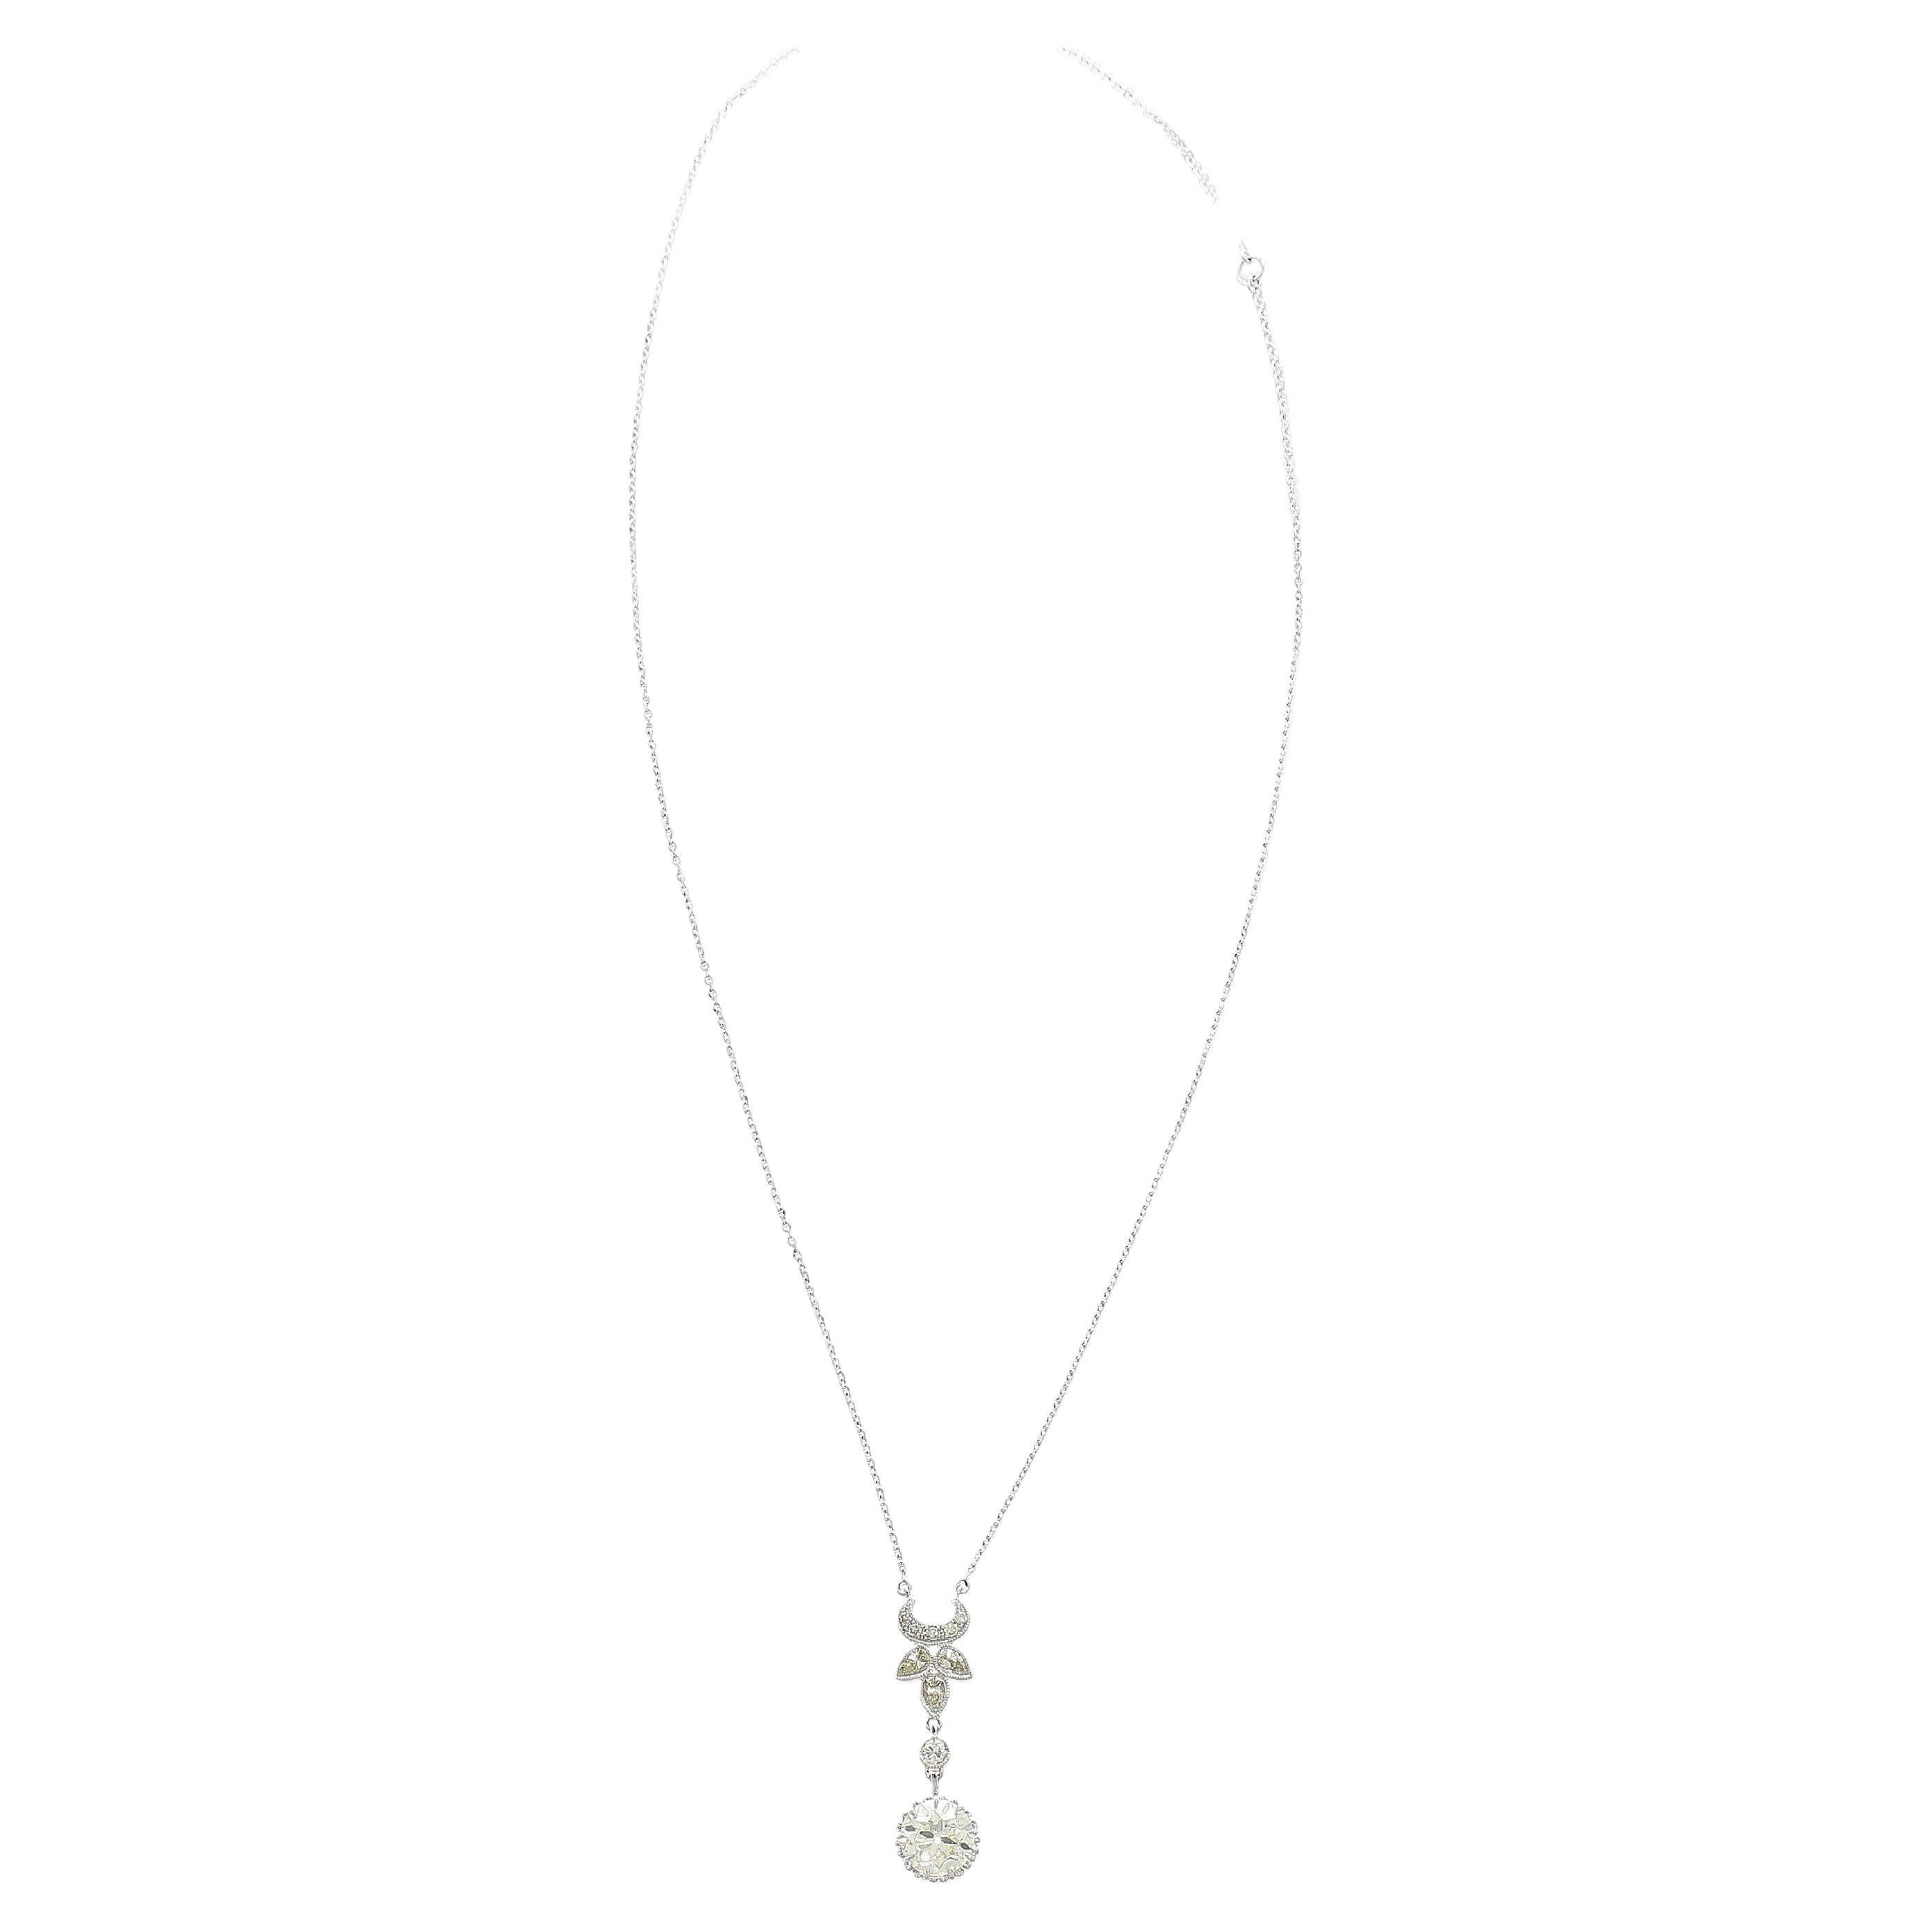 18K white gold vintage pendant necklace. Featuring an antique retro style floral motif drop mounting a 2.6 carat old European cut diamond center stone. The center stone is warm, with excellent clarity and a vintage flair. Adorned with 3 drop cut and